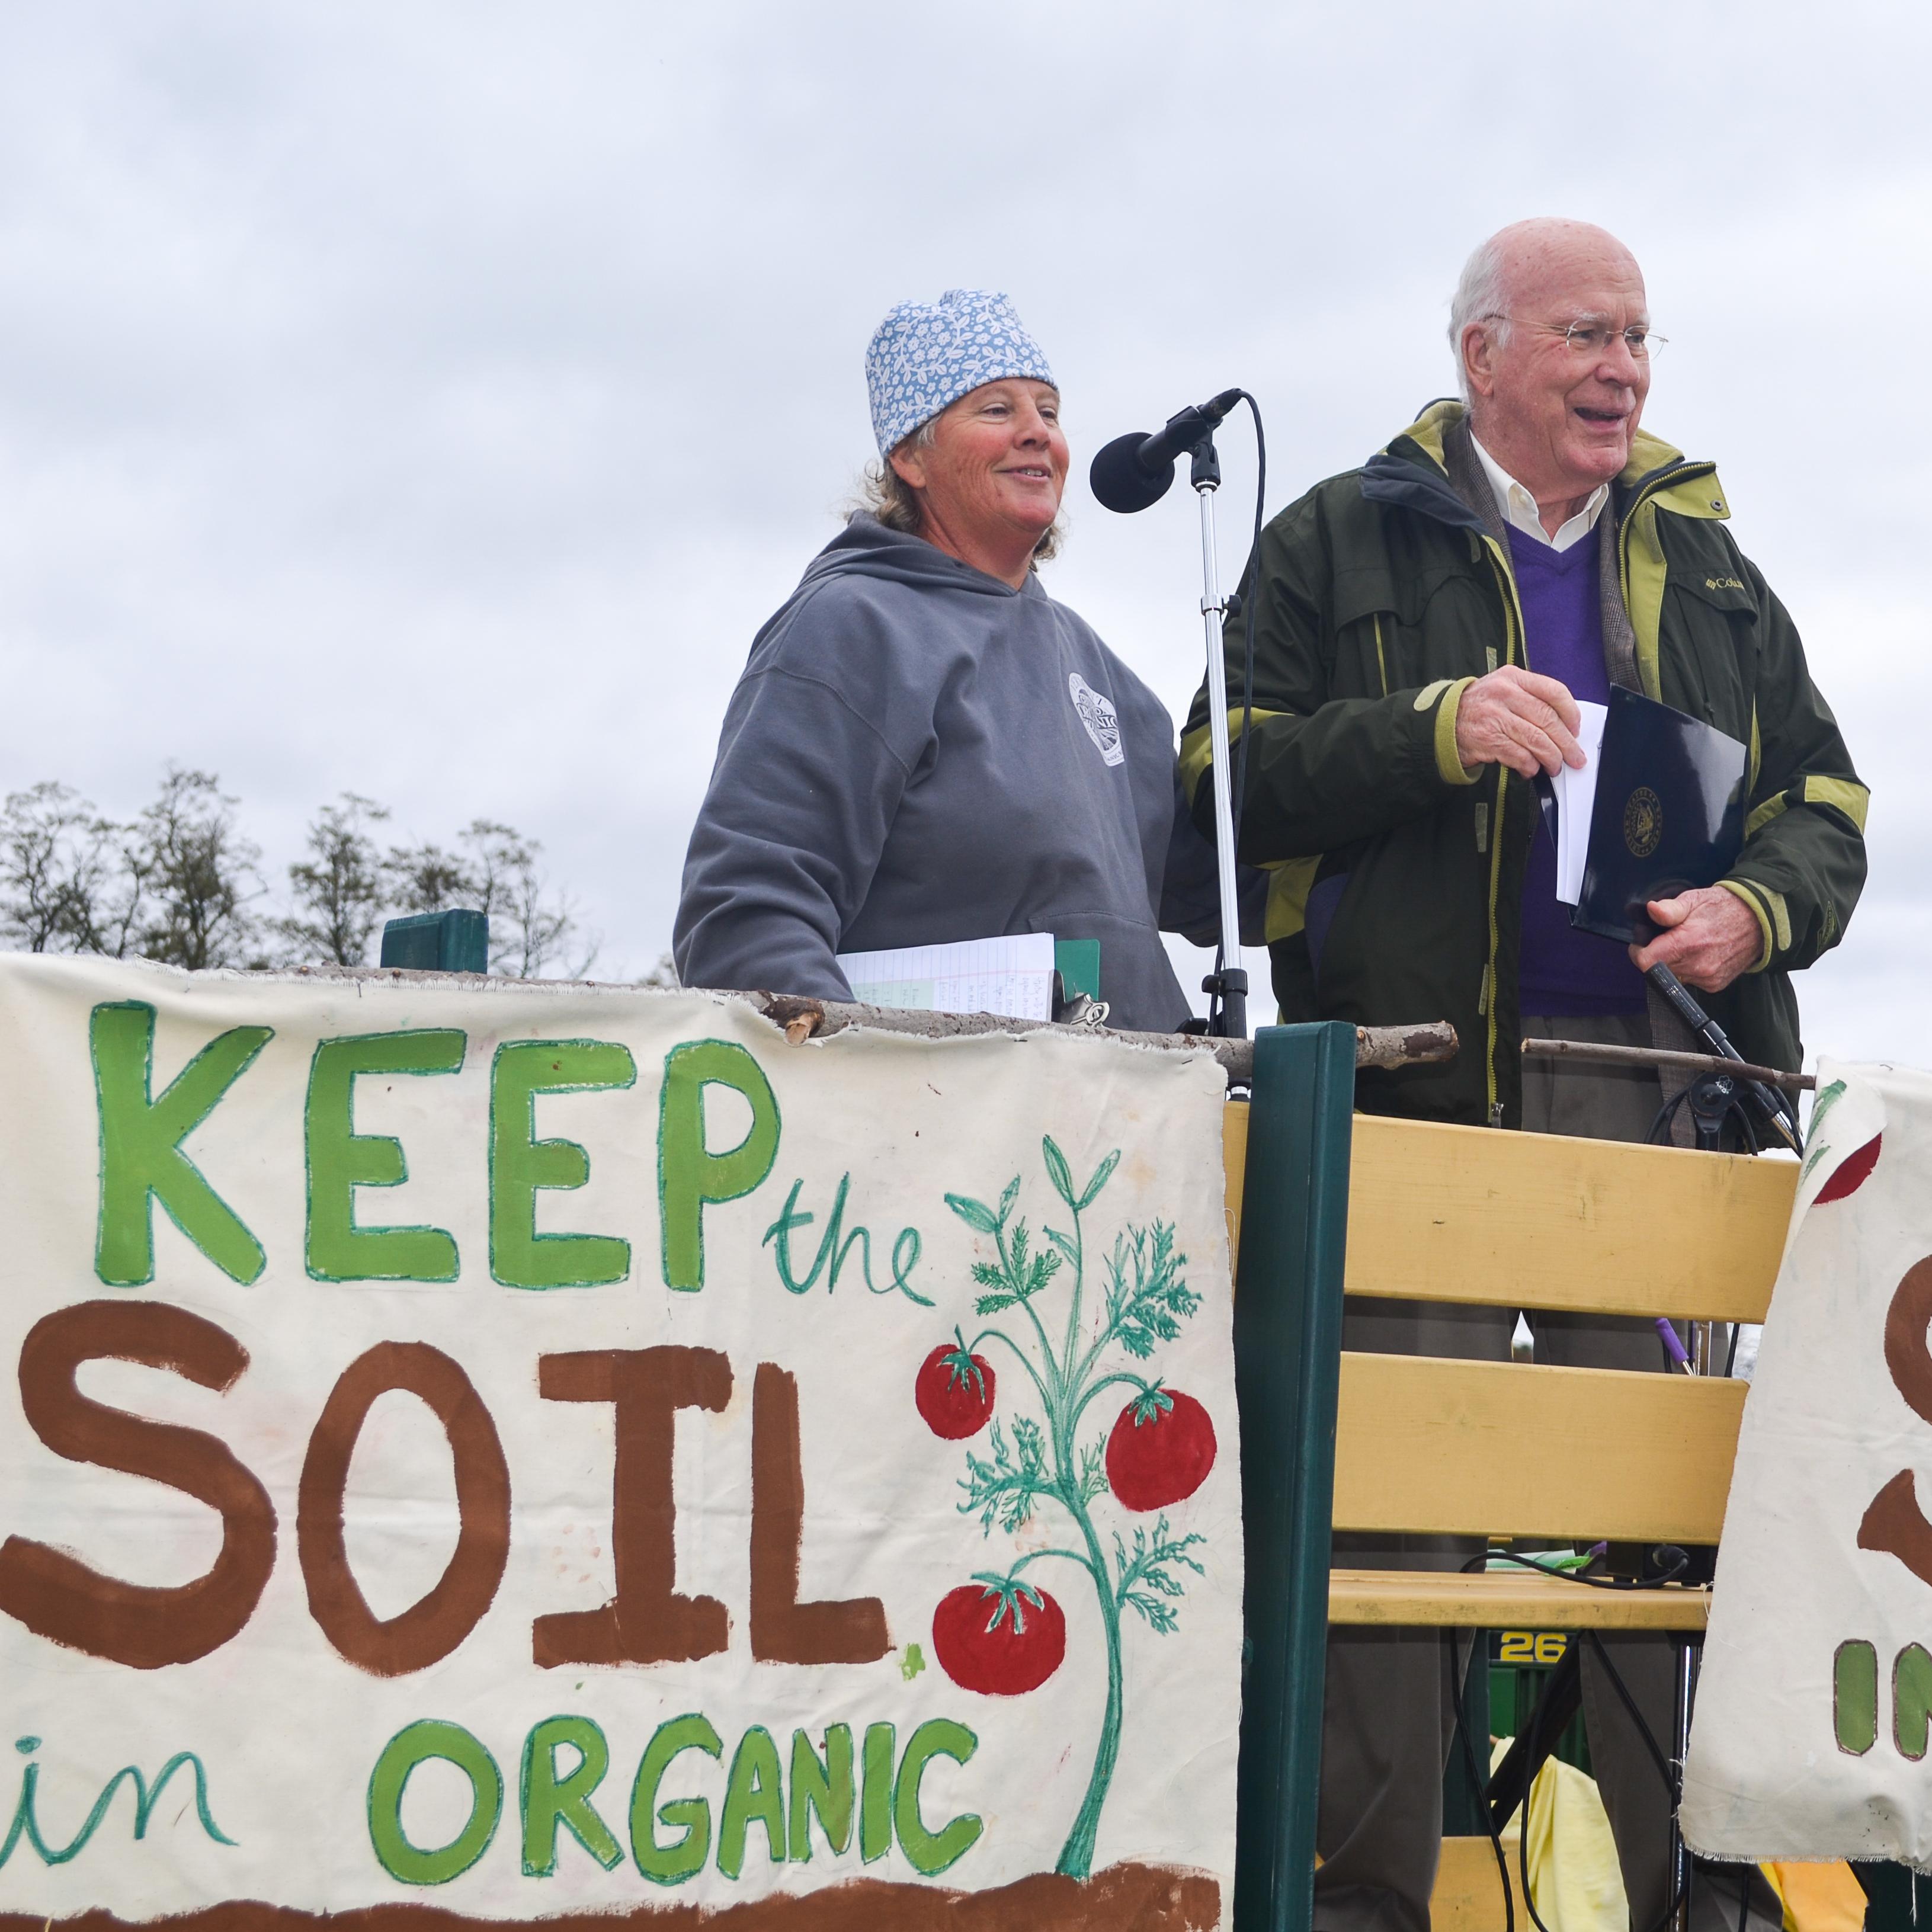 Enid and Senator Leahy at the rally for keeping the soil in organic